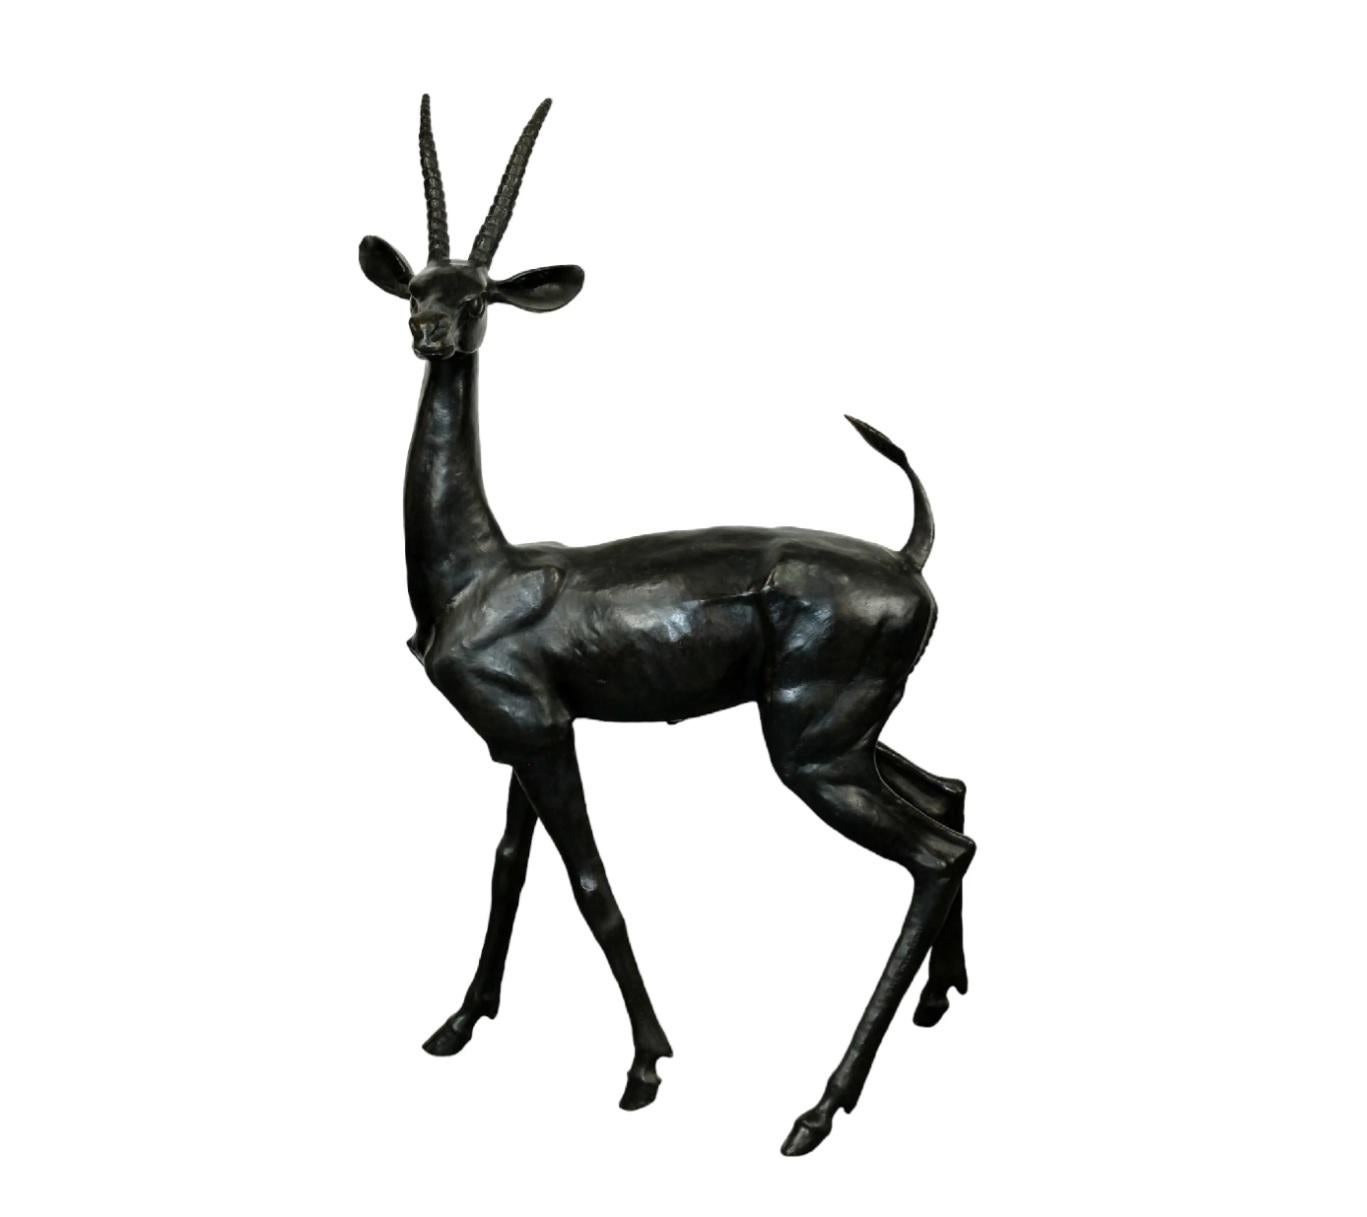 Impressive gazelle sculpture in blackened bronze by American artist Max Turner (b. 1925), signed and dated 1976 on leg. Stands nearly 5' tall. 